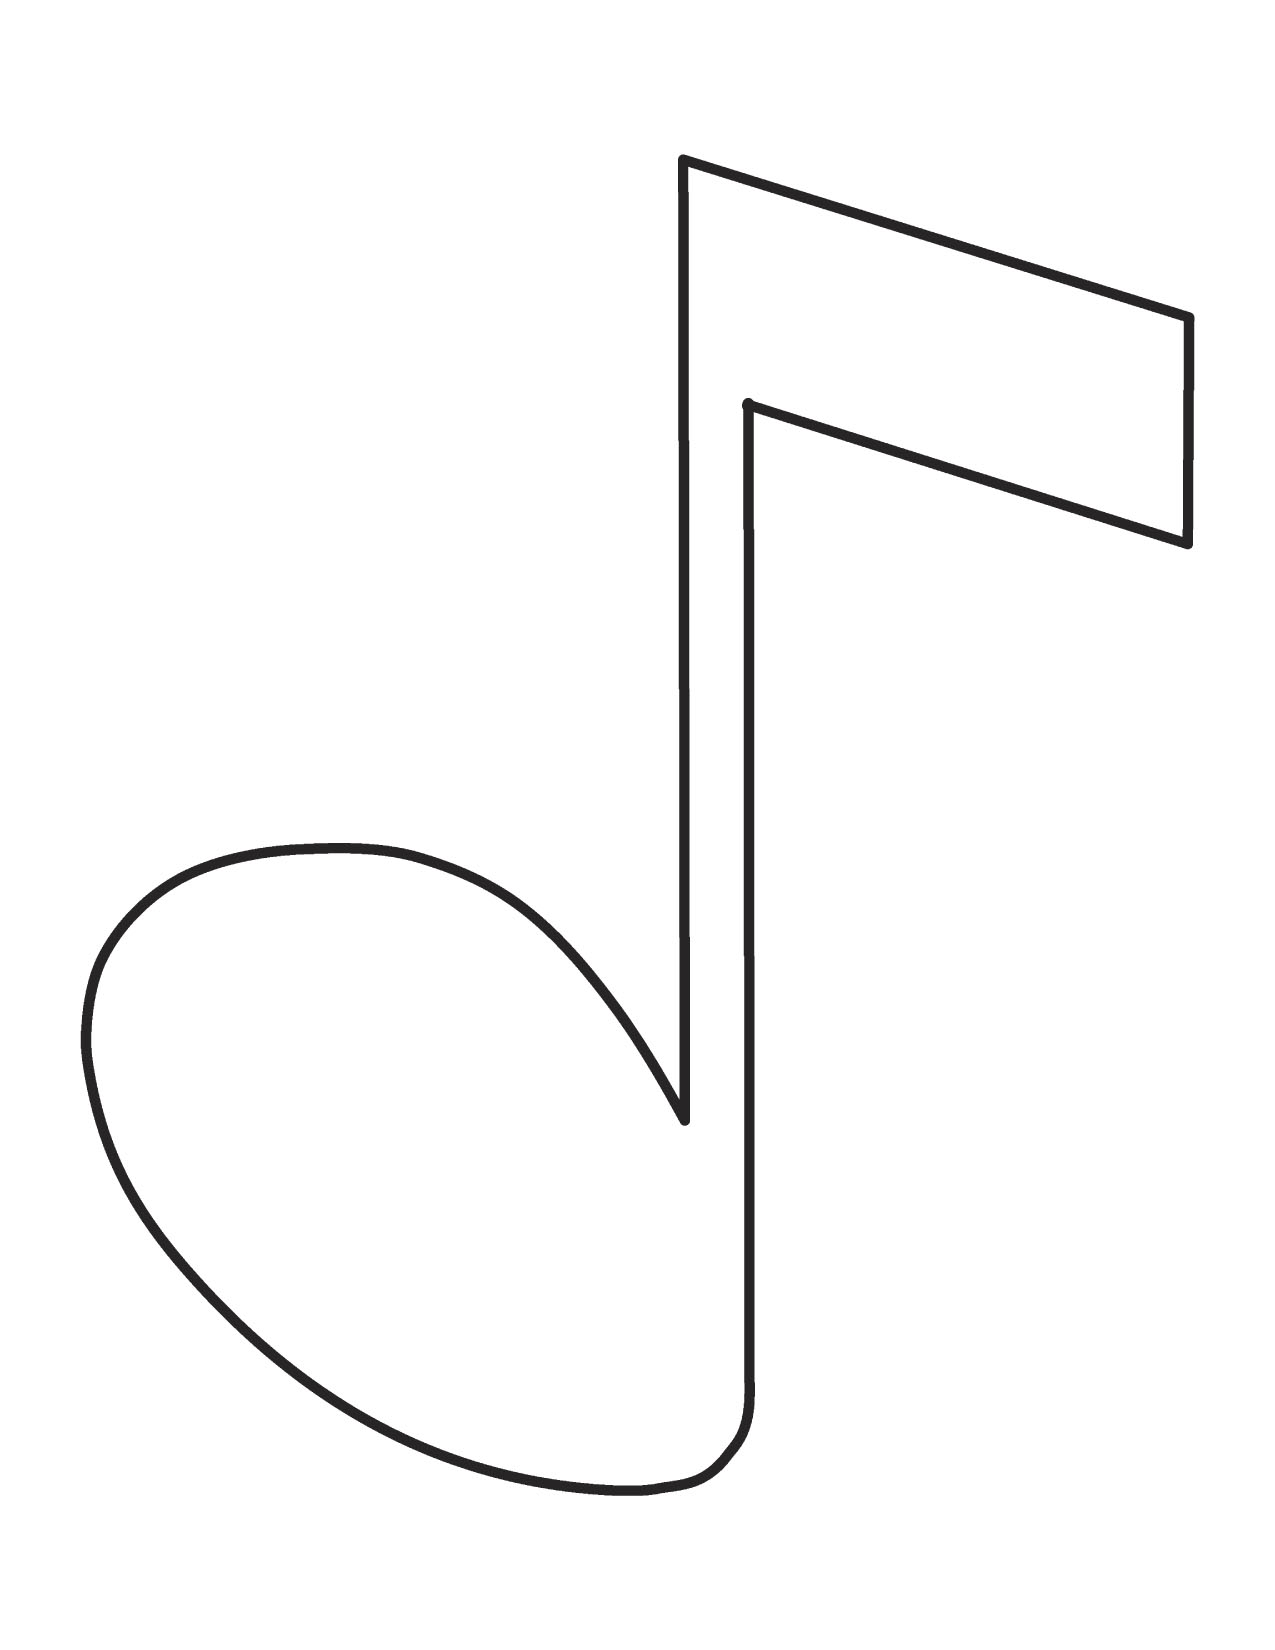 White Music Note Clip Art Background 1 HD Wallpapers | lzamgs.